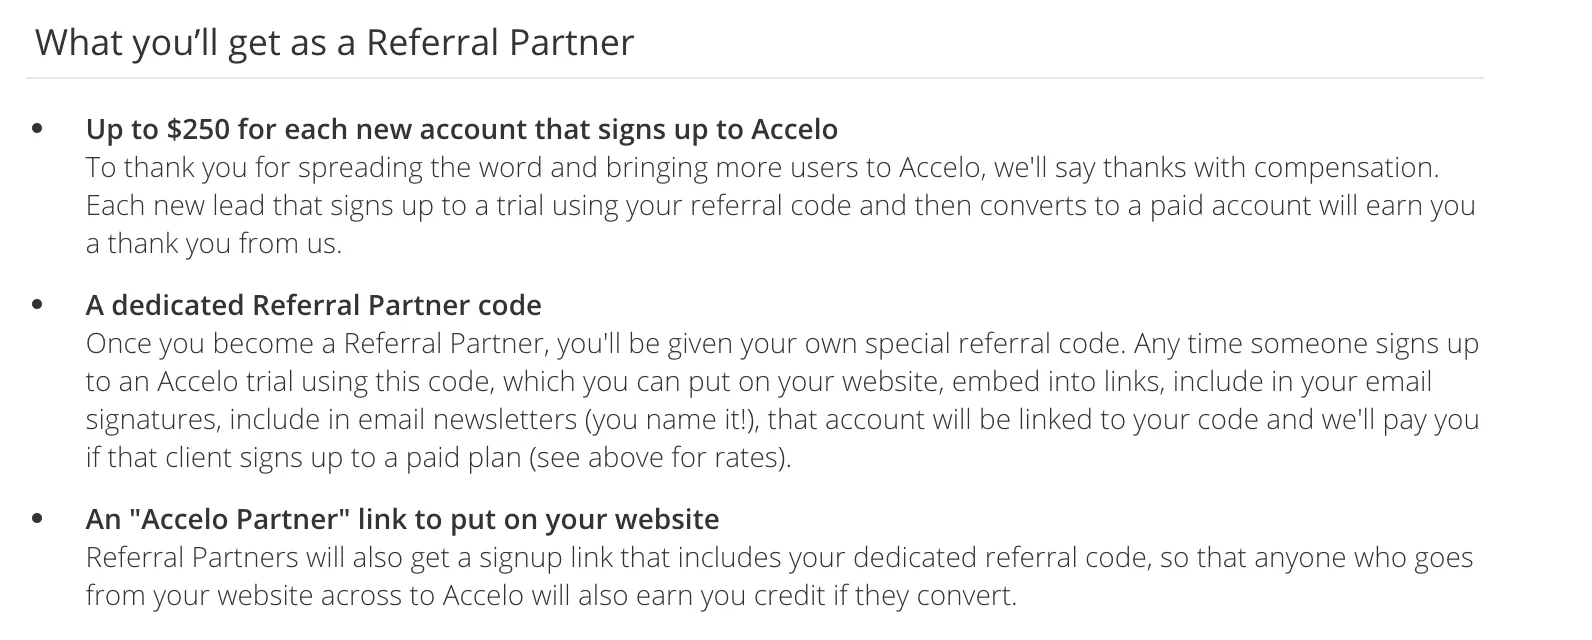 an overview of benefits for Accelo partner program